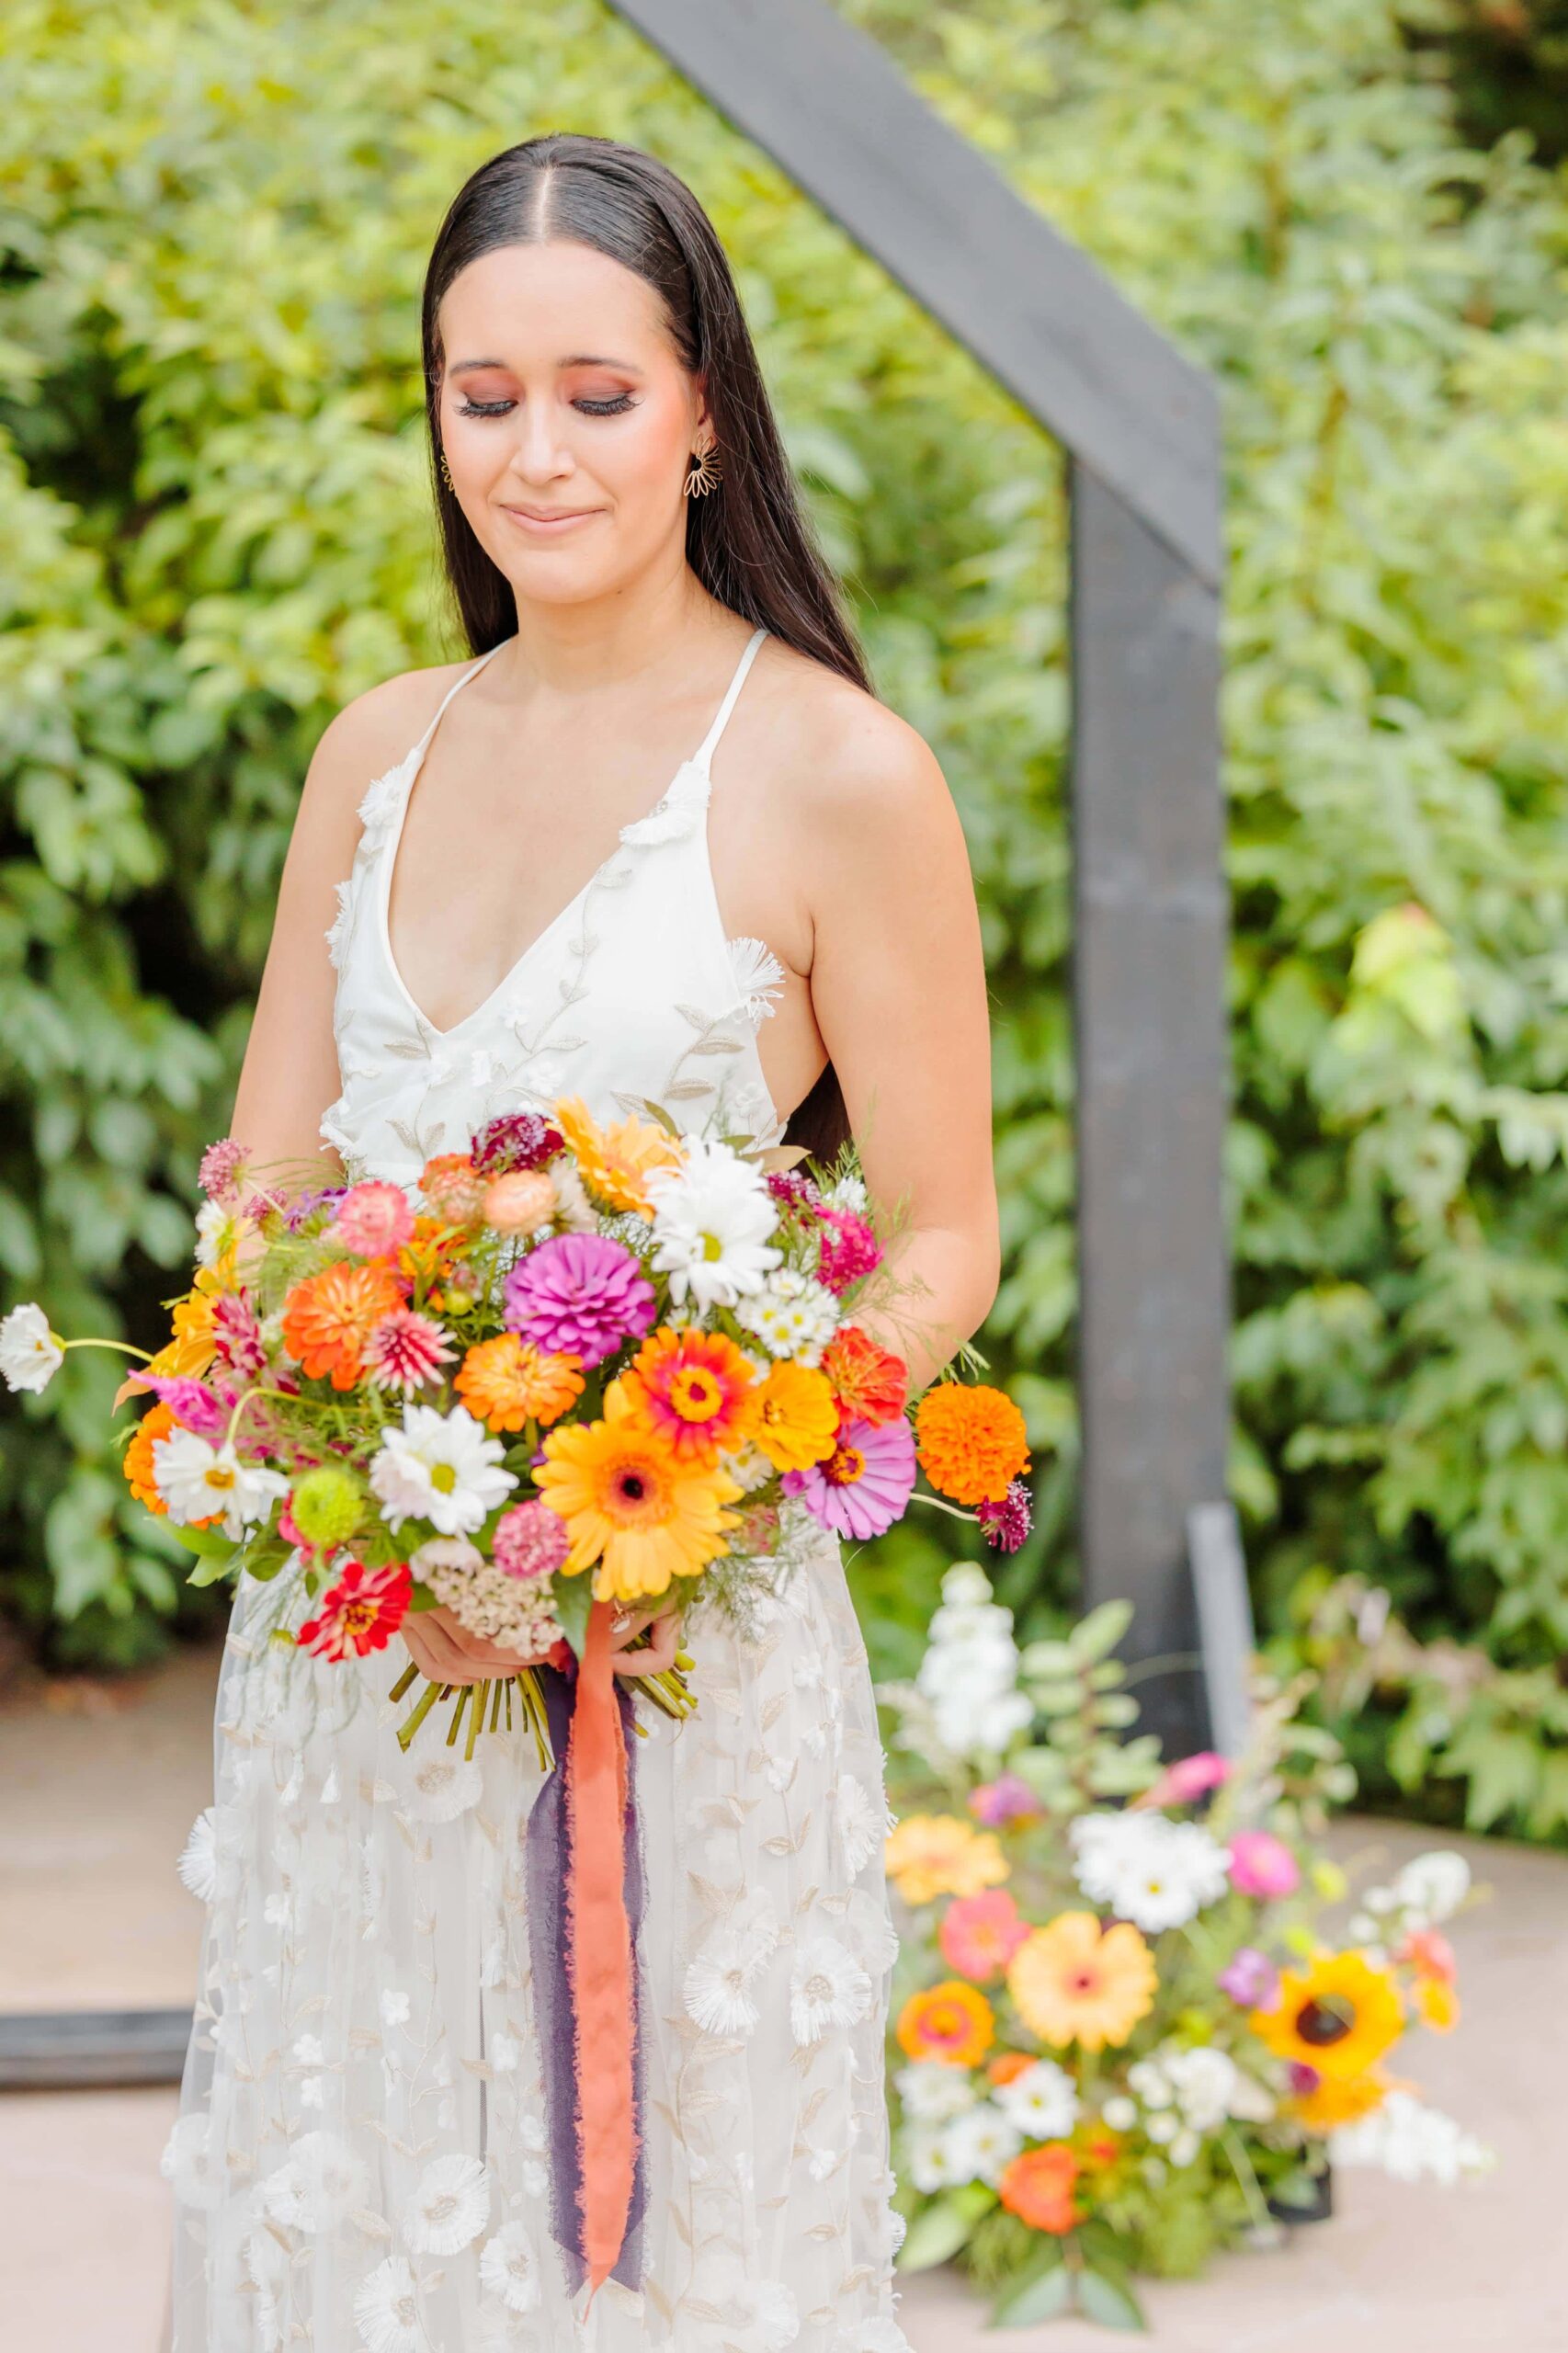 The bride looks down at her brightly colored bouquet, made to match the orange and yellow colors of her disco wedding.